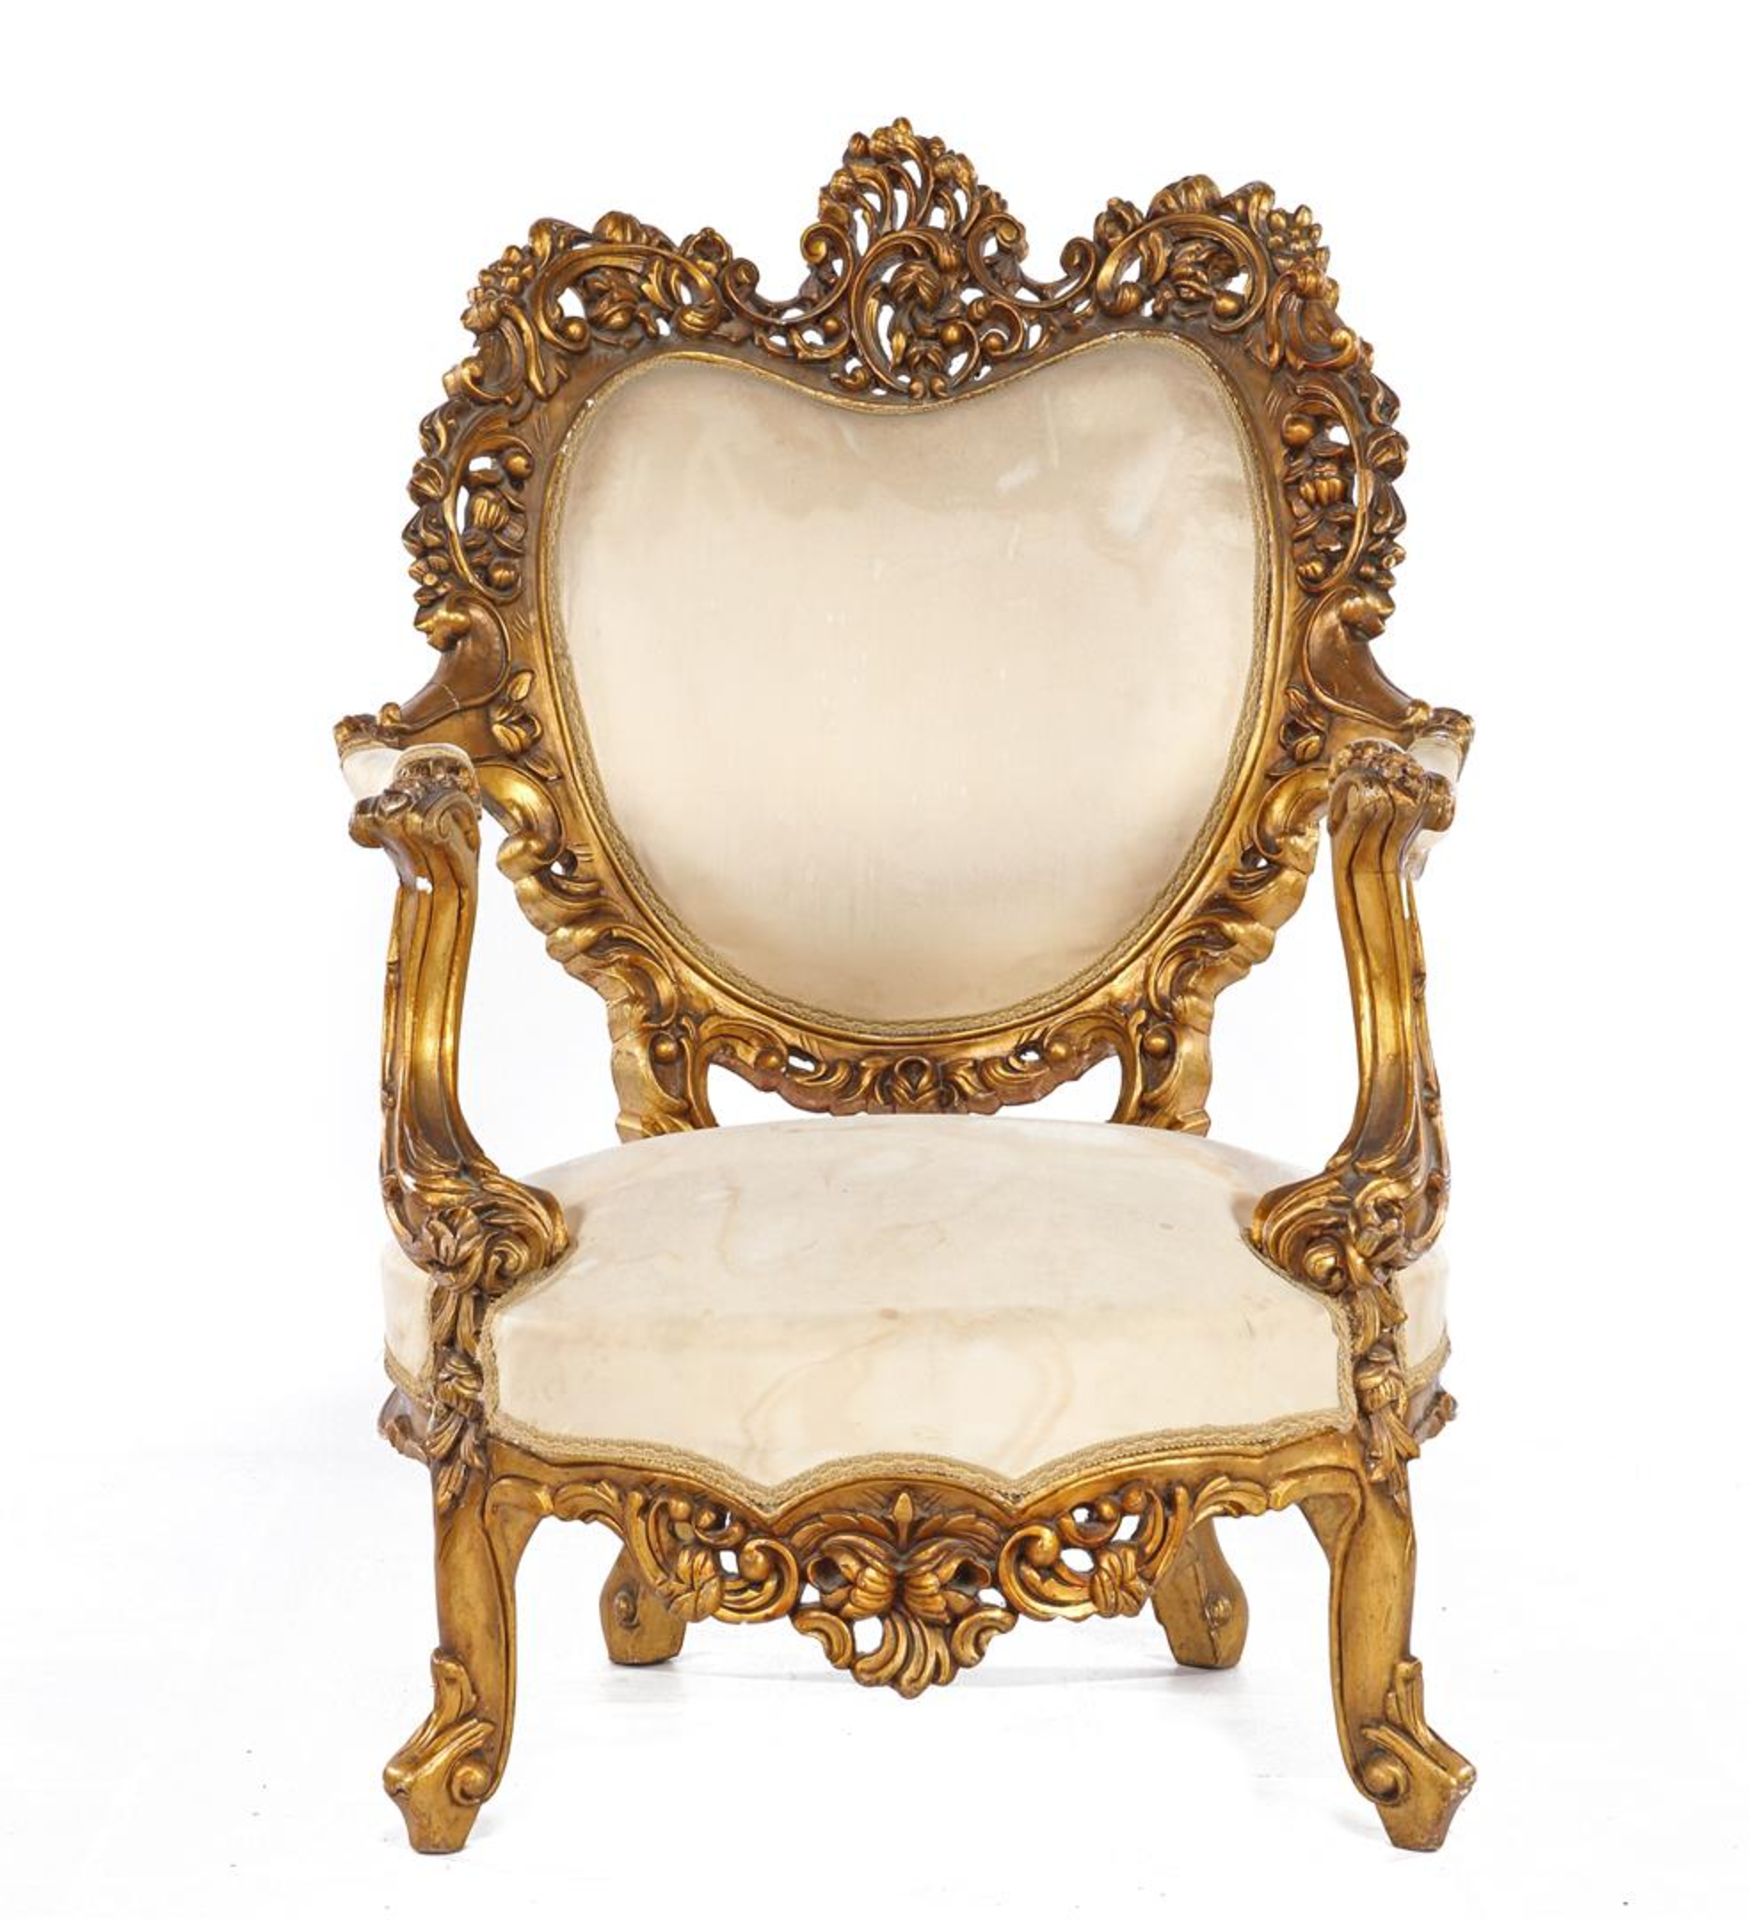 Classic gold-colored armchair with rich stitching - Image 2 of 3